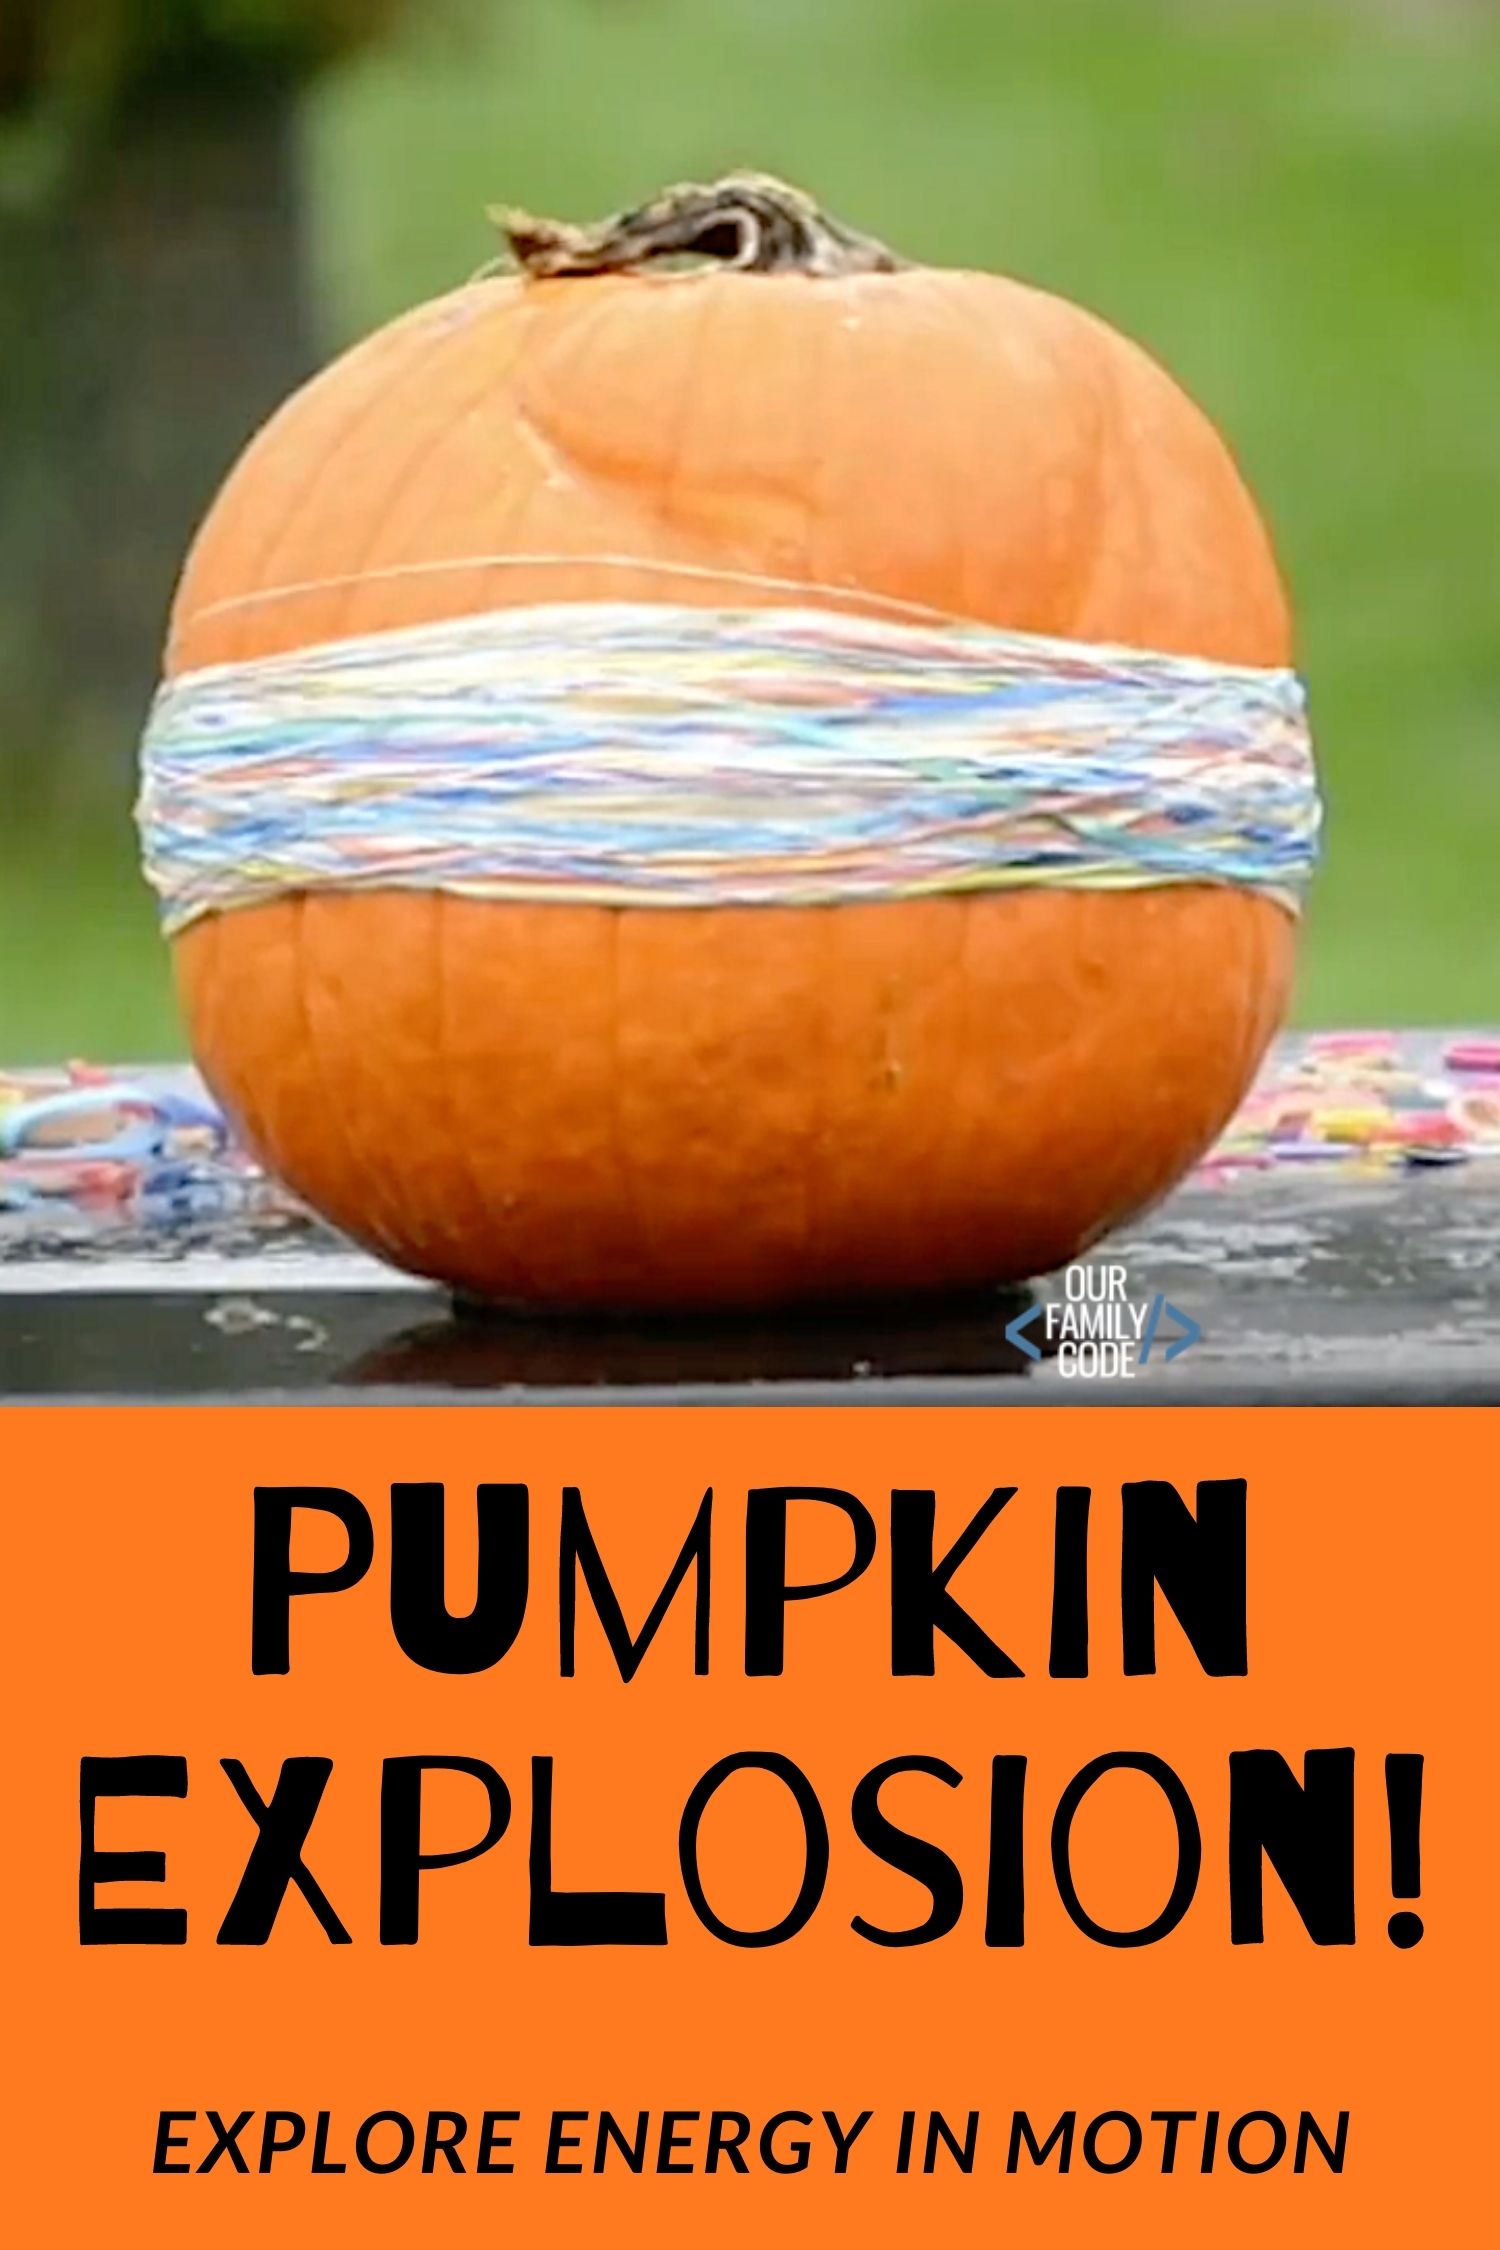 exploding pumpkin explosions energy in motion
